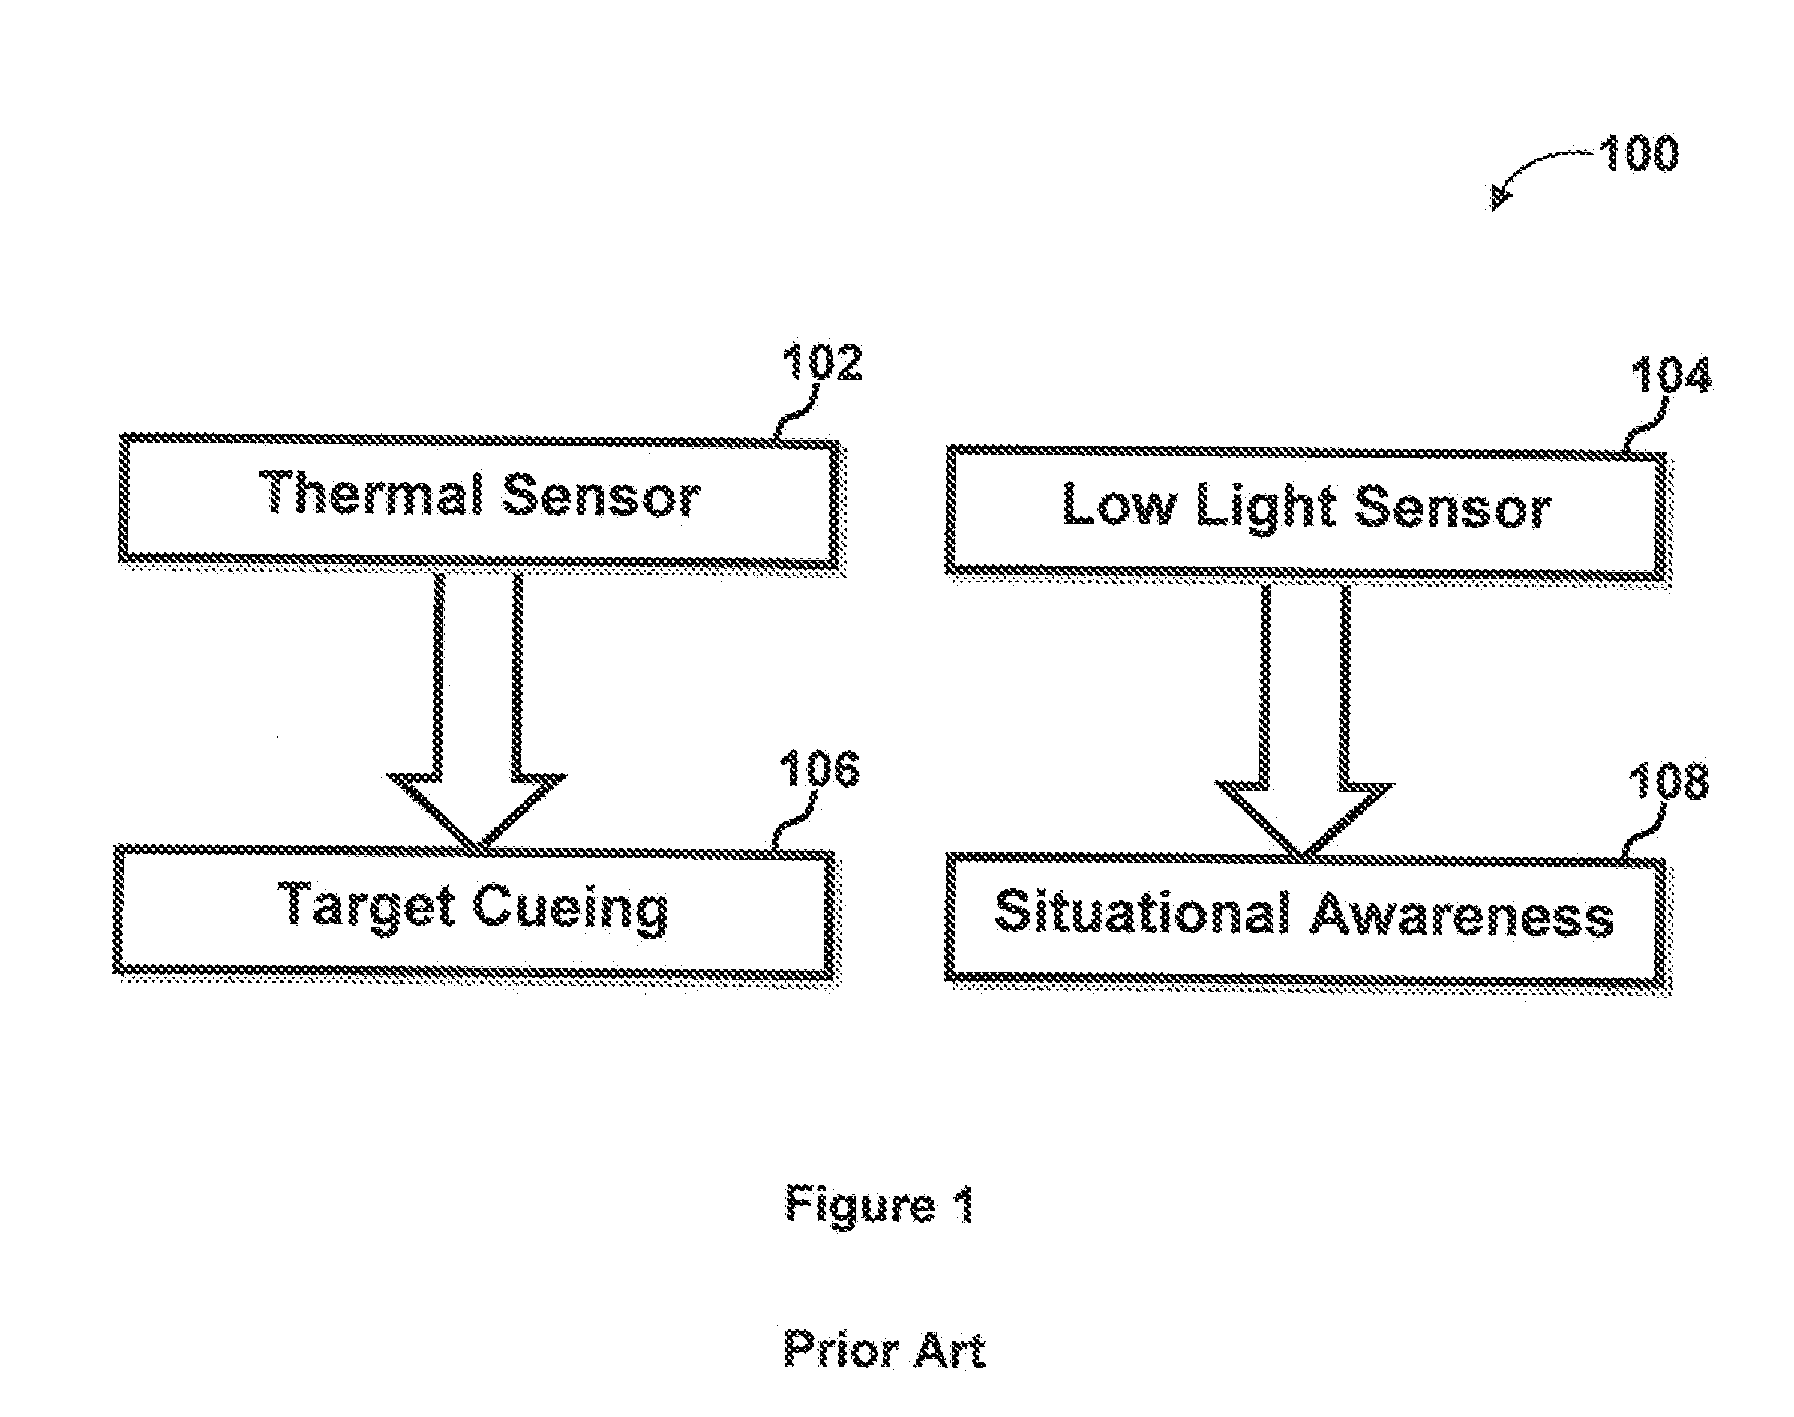 System and method for situational awareness and target cueing